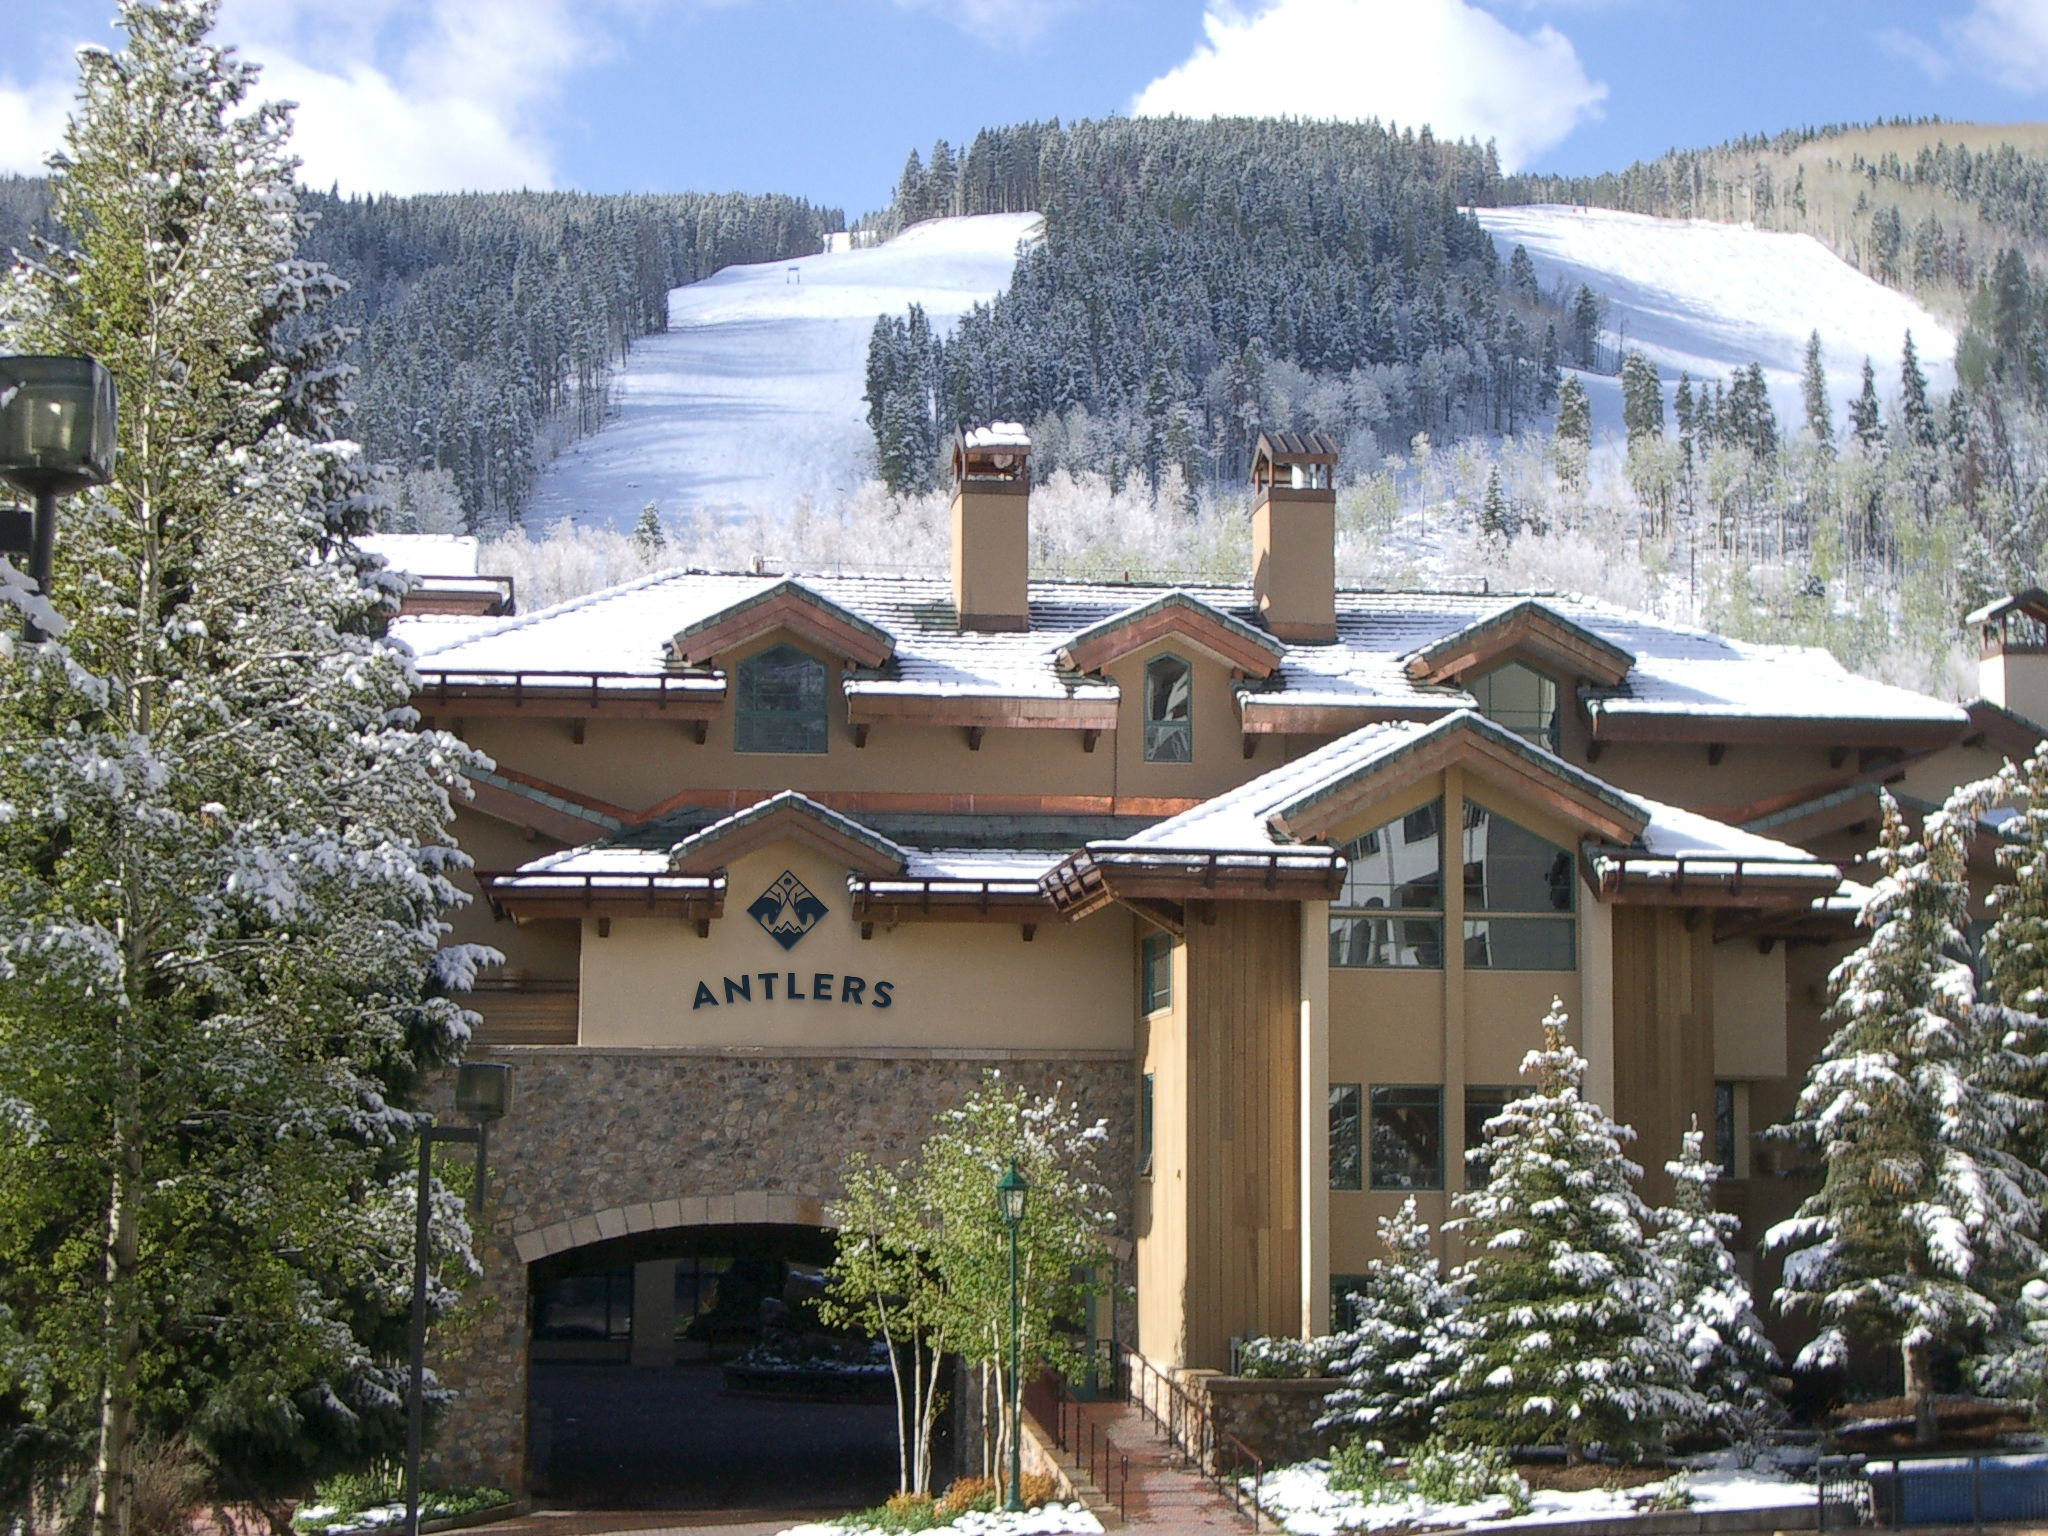 A favorite with families for Vail, Colorado, skiing and more, the conveniently located Antlers at Vail hotel is offering a special discounted Taste of Vail package for April.